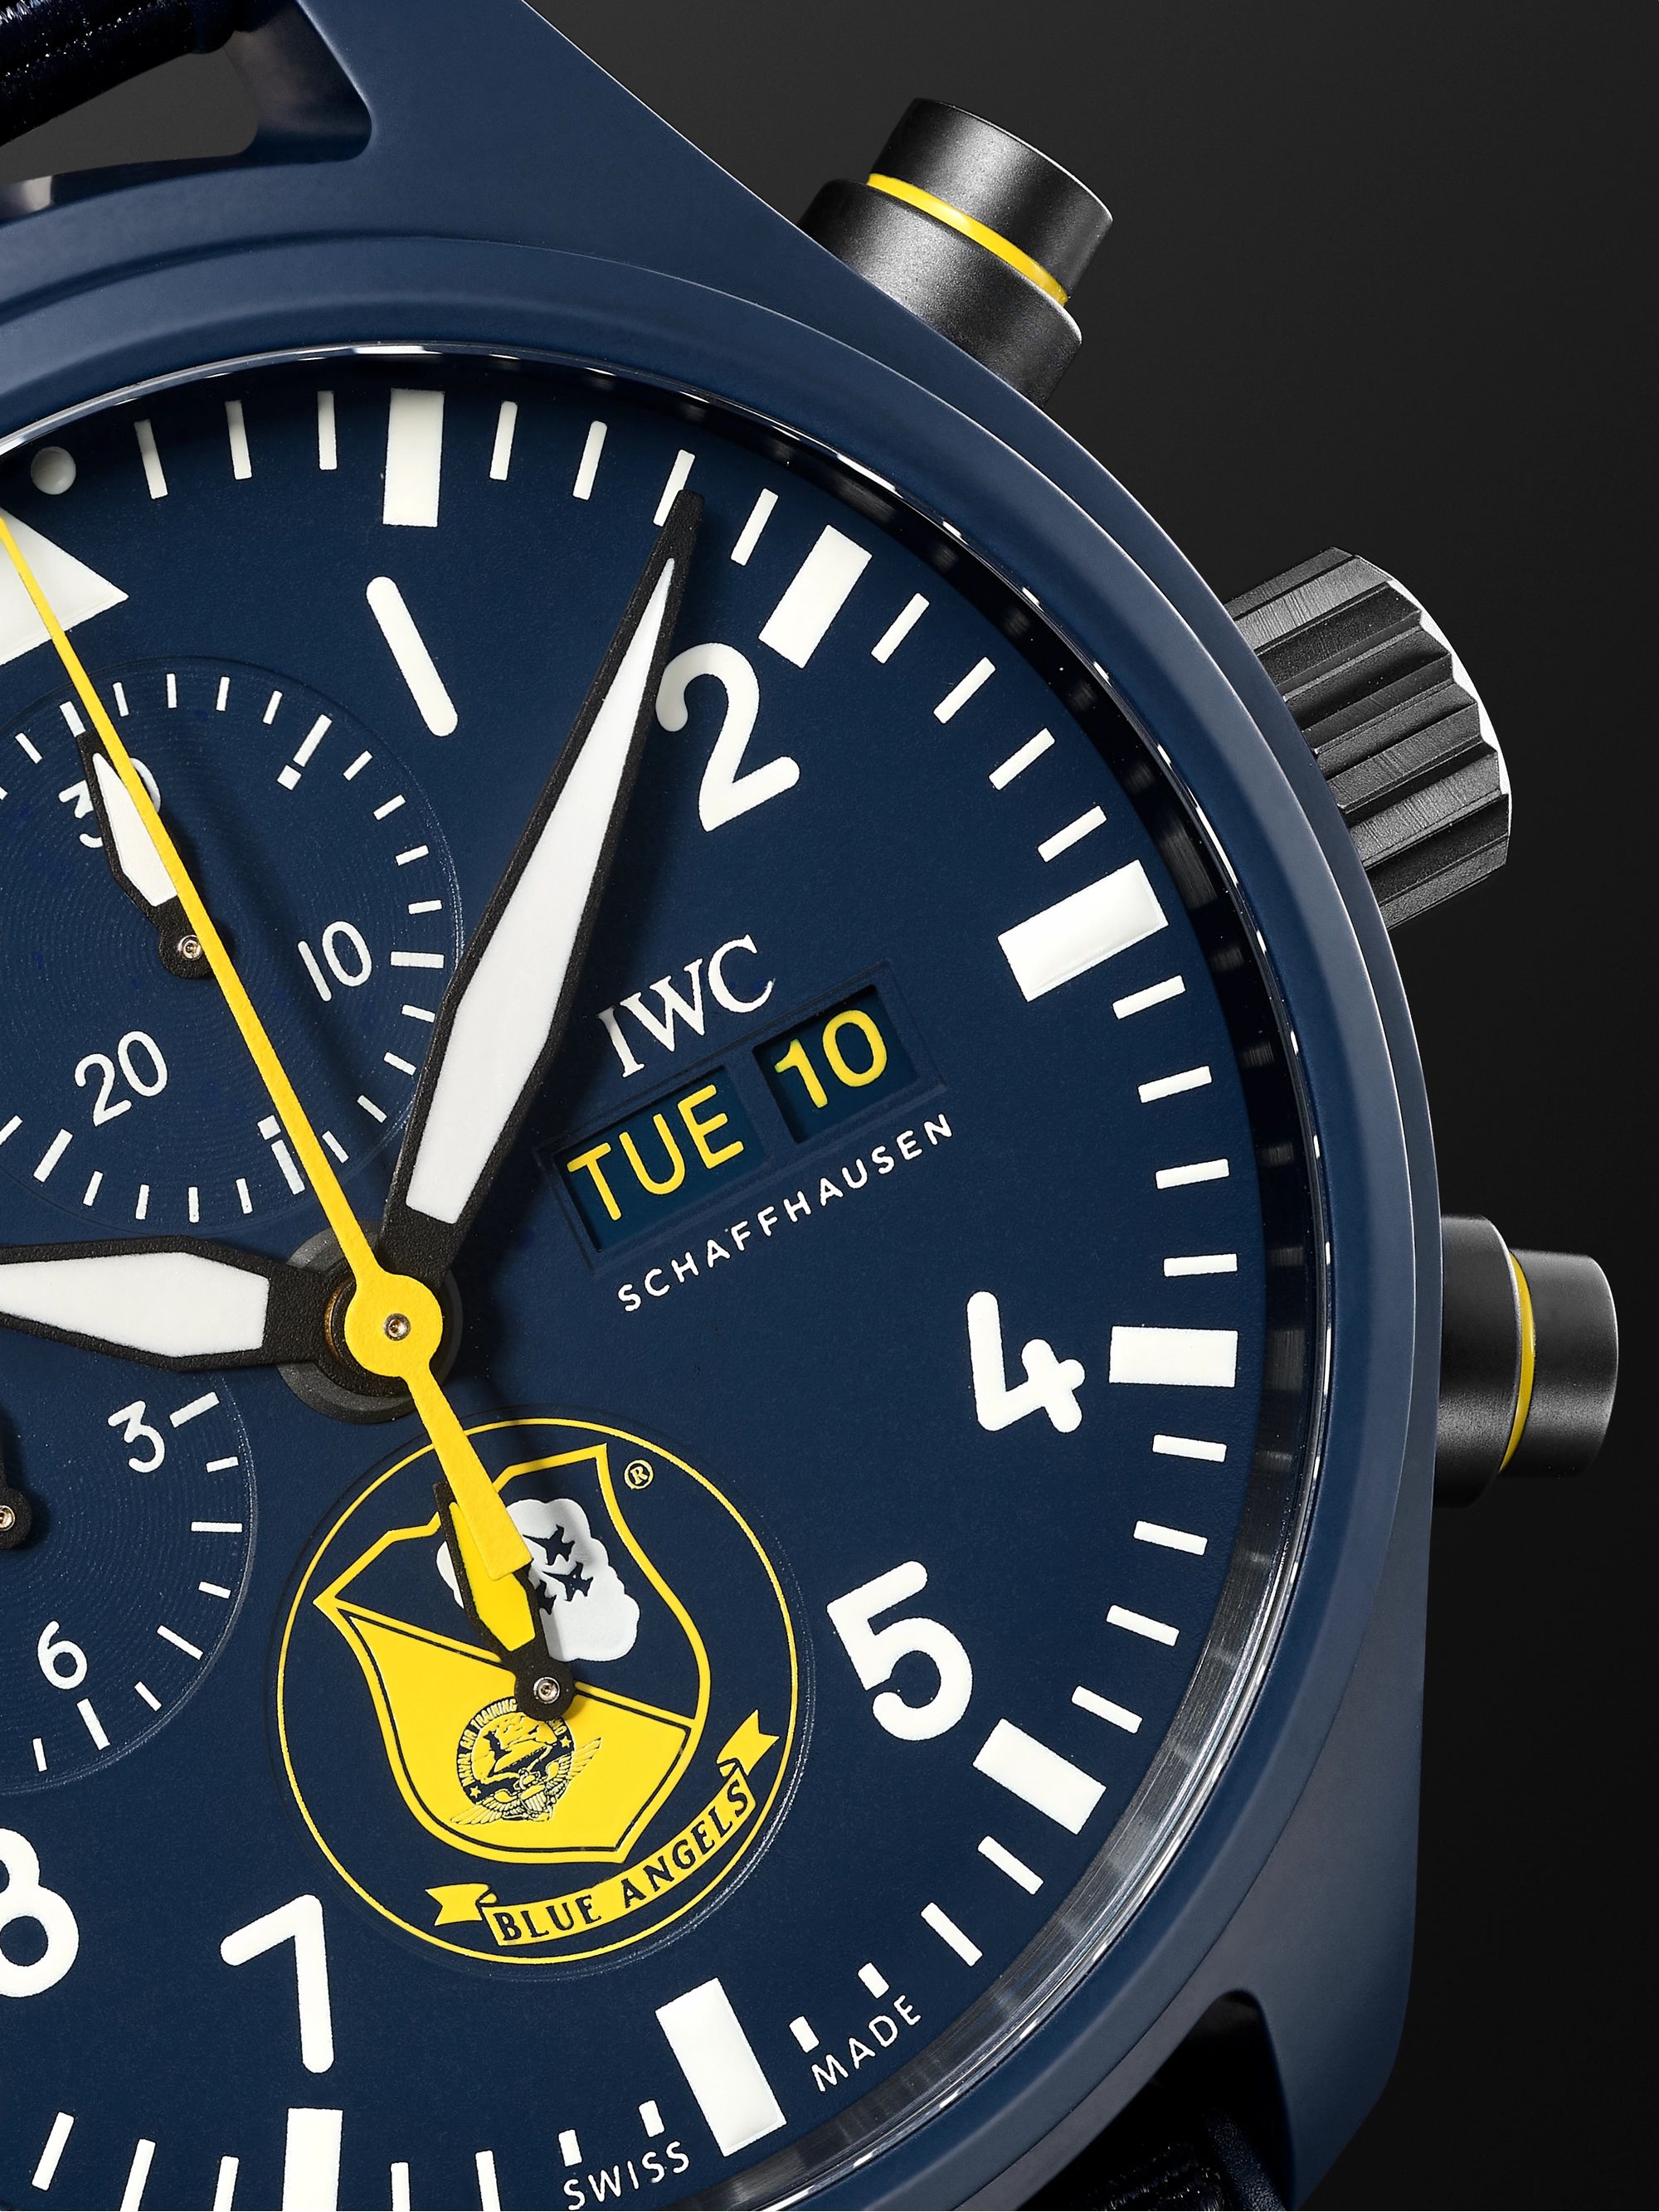 IWC SCHAFFHAUSEN Pilot's Blue Angels II Limited Edition Automatic Chronograph 44.5mm Ceramic and Textile Watch, Ref. No. IW389109